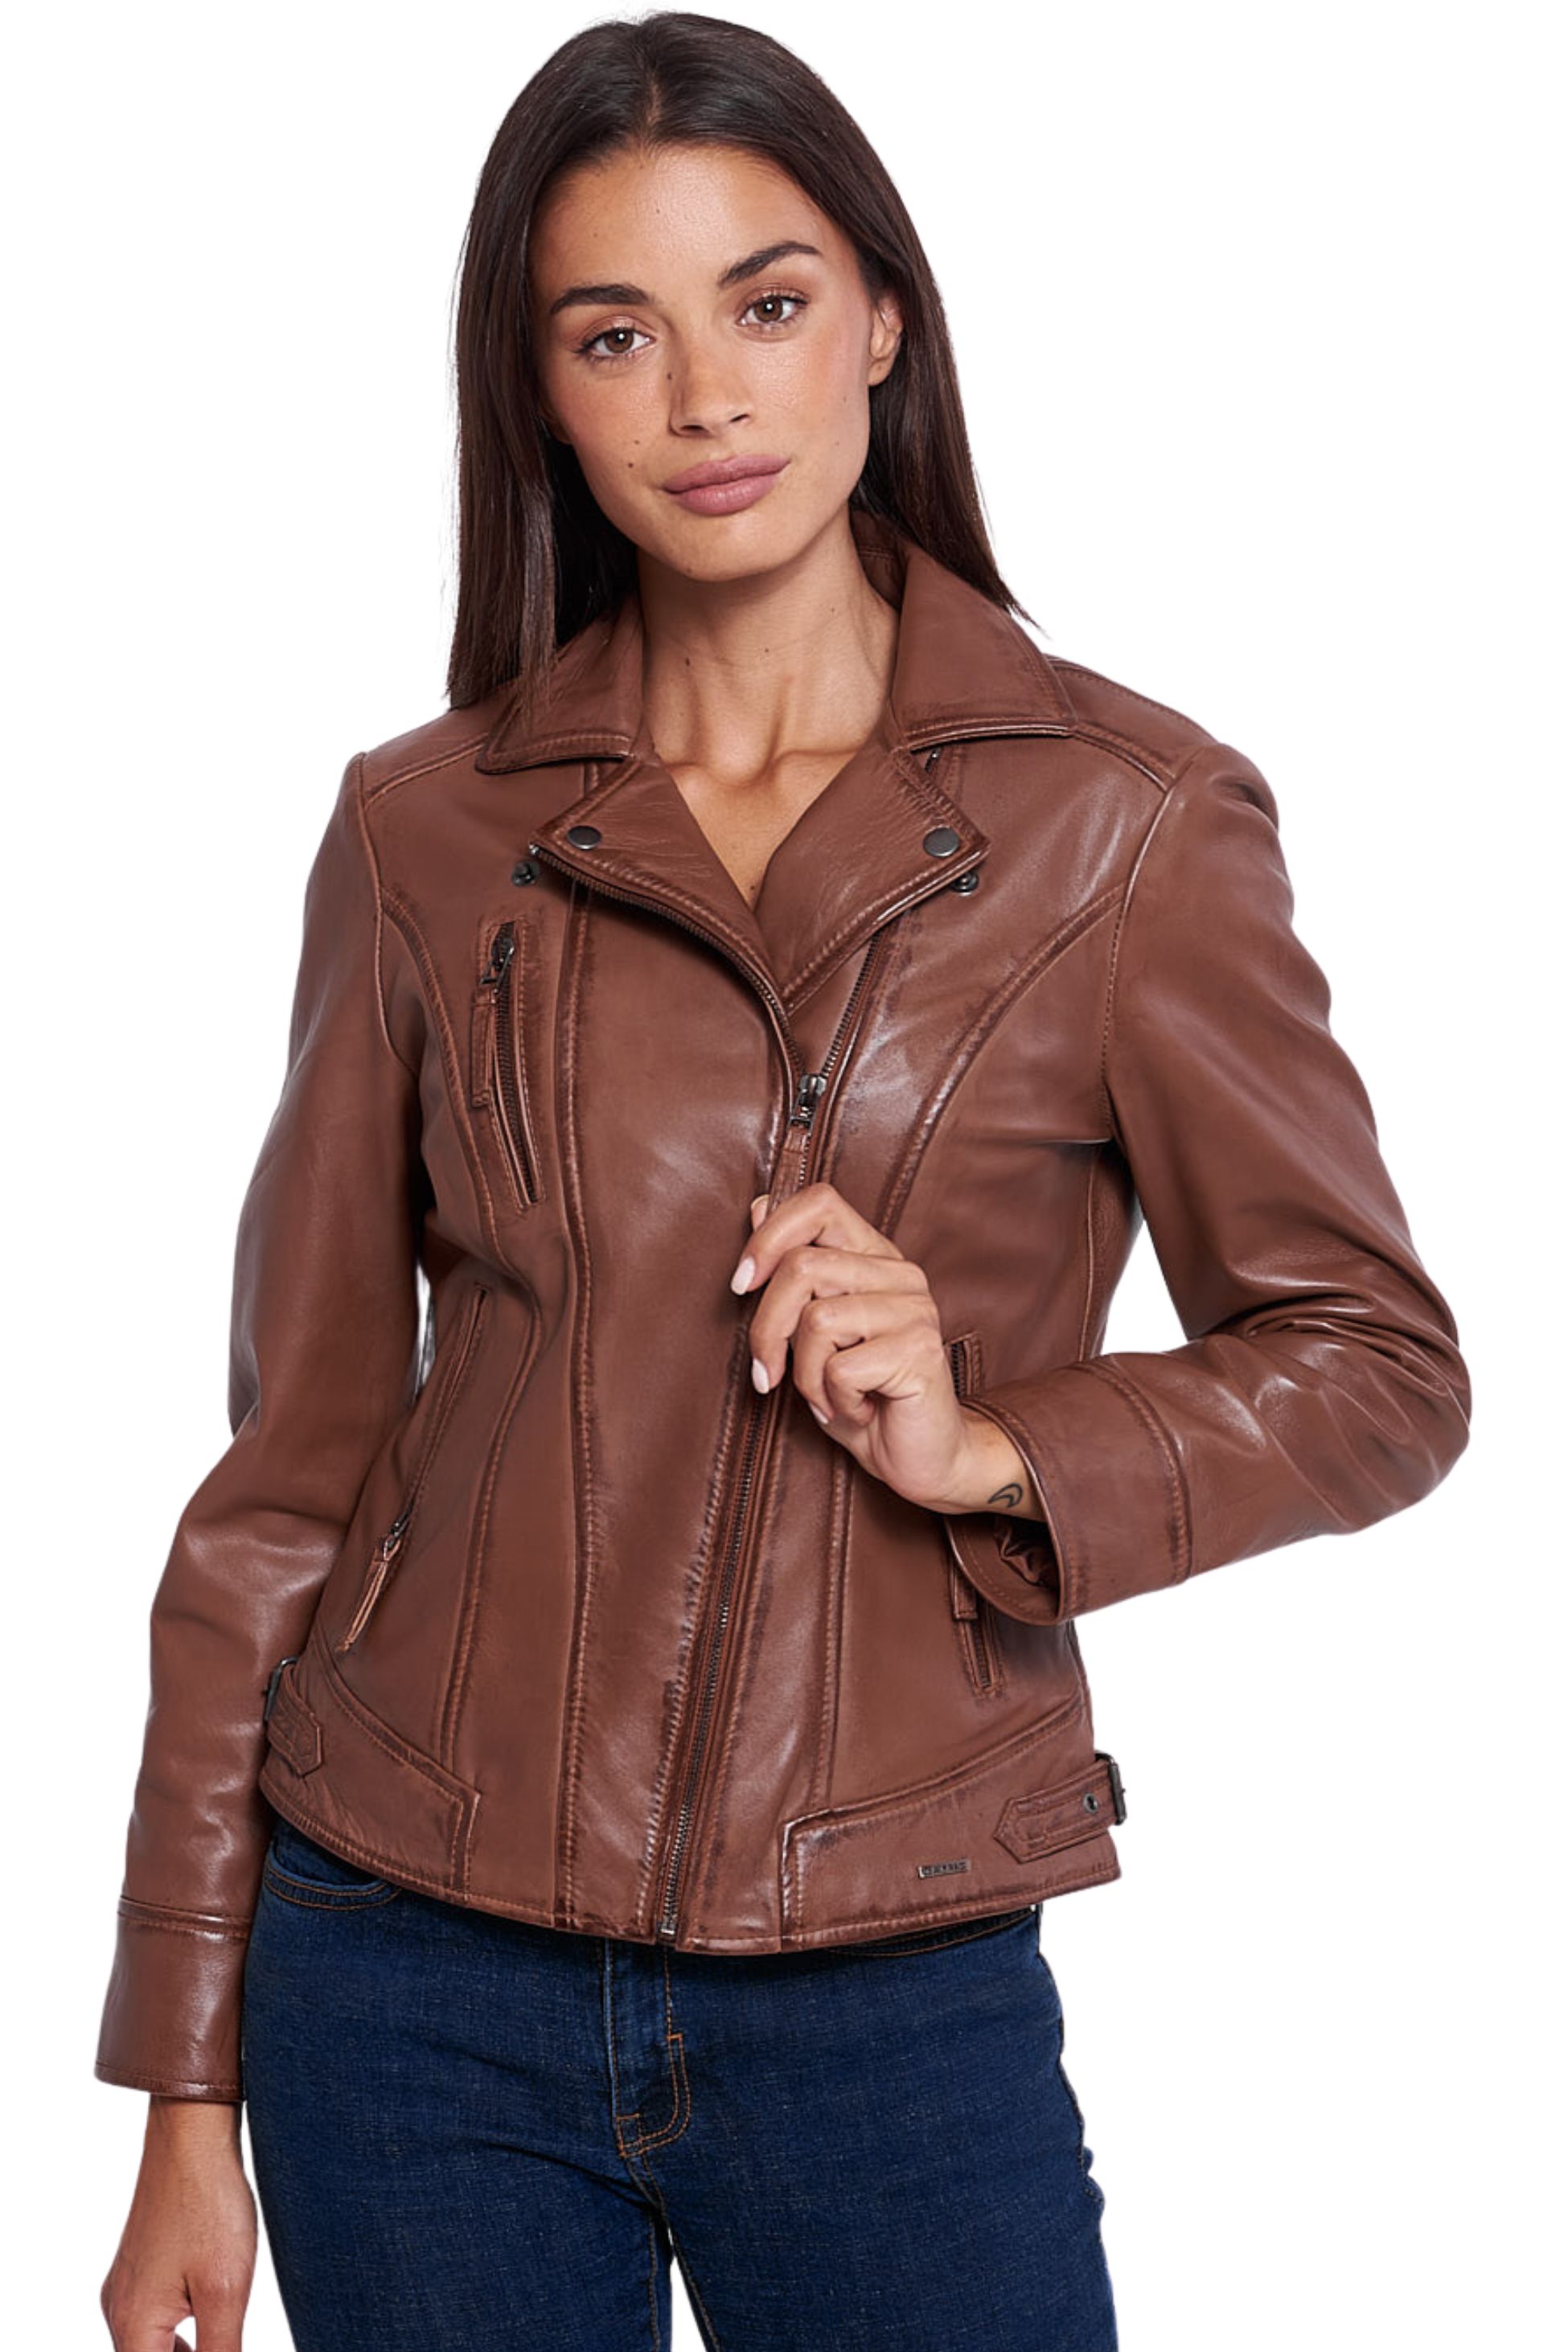 PHEDRA SHEEP COGNAC - AUTHENTIC WOMENS LEATHER JACKET